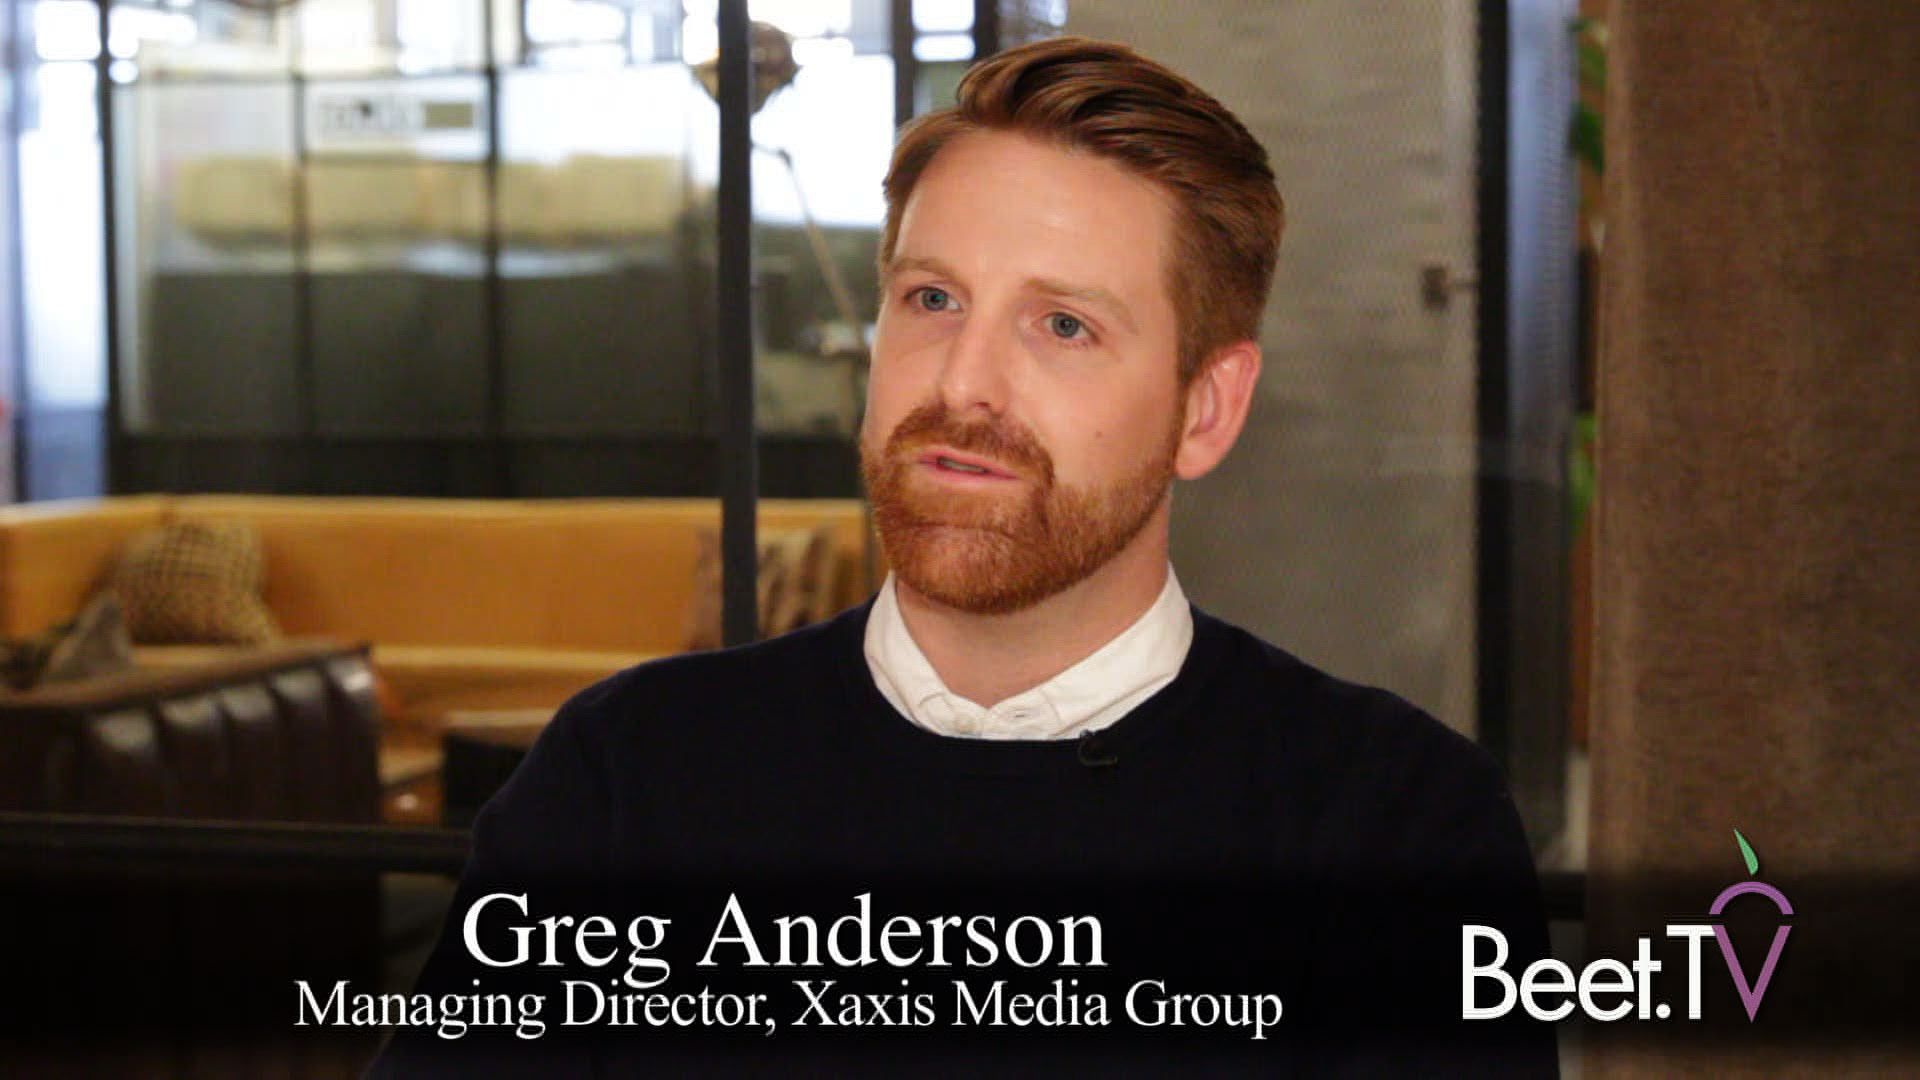 Omni-Channel Depends On Measurement: Xaxis’ Anderson